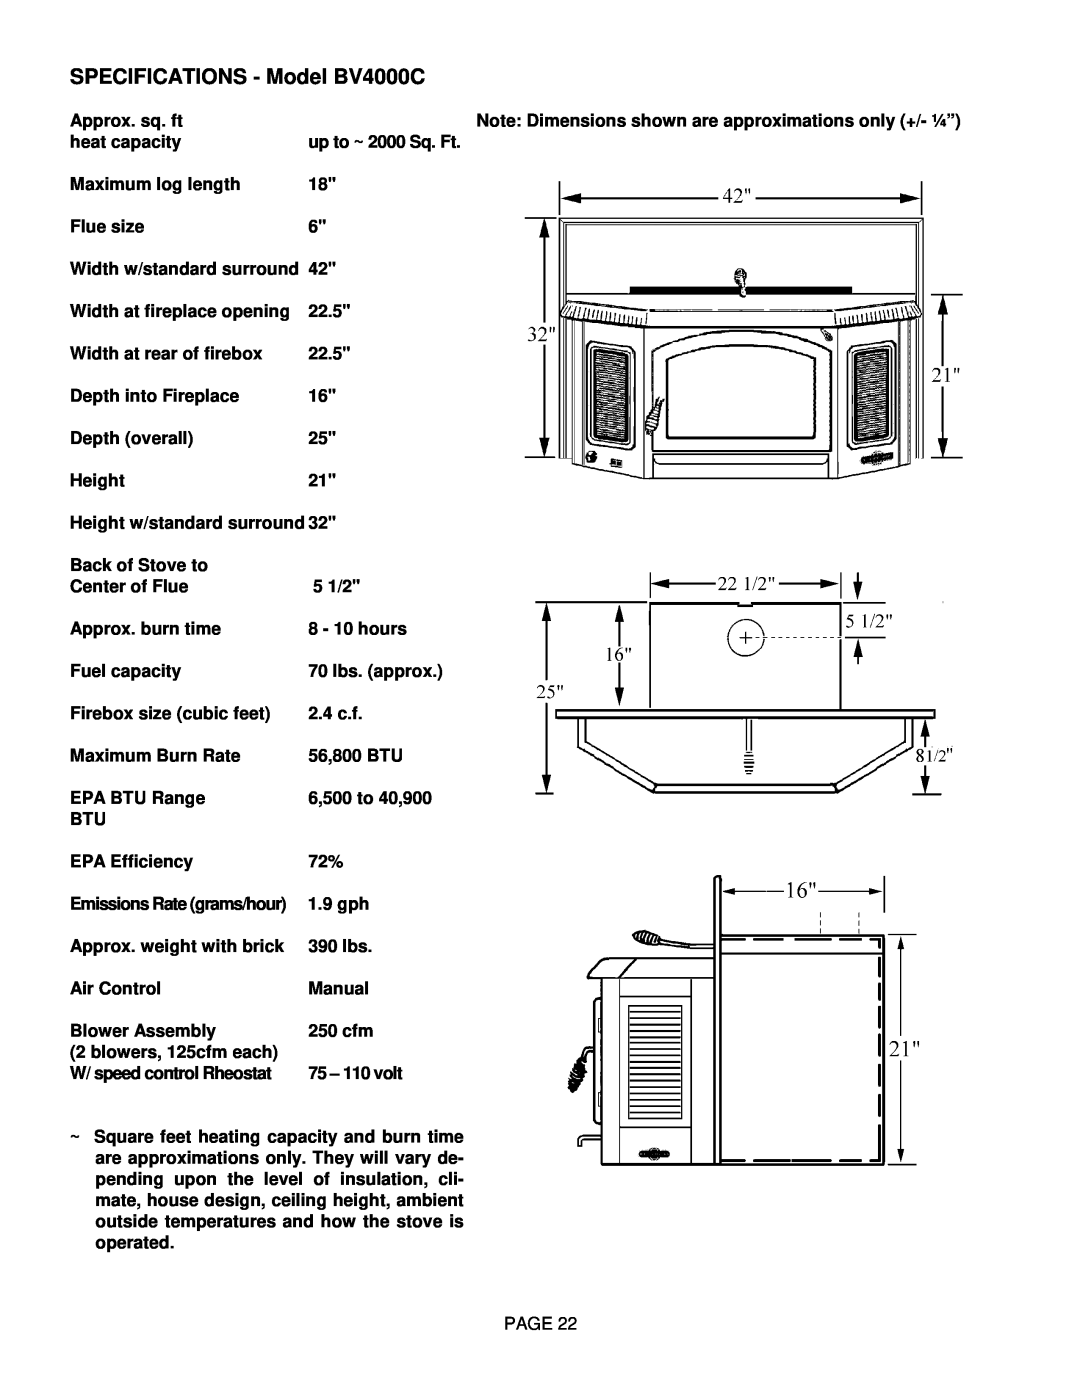 Lennox International Inc SPECIFICATIONS - Model BV4000C, Approx. sq. ft, heat capacity, up to ~ 2000 Sq. Ft, Flue size 